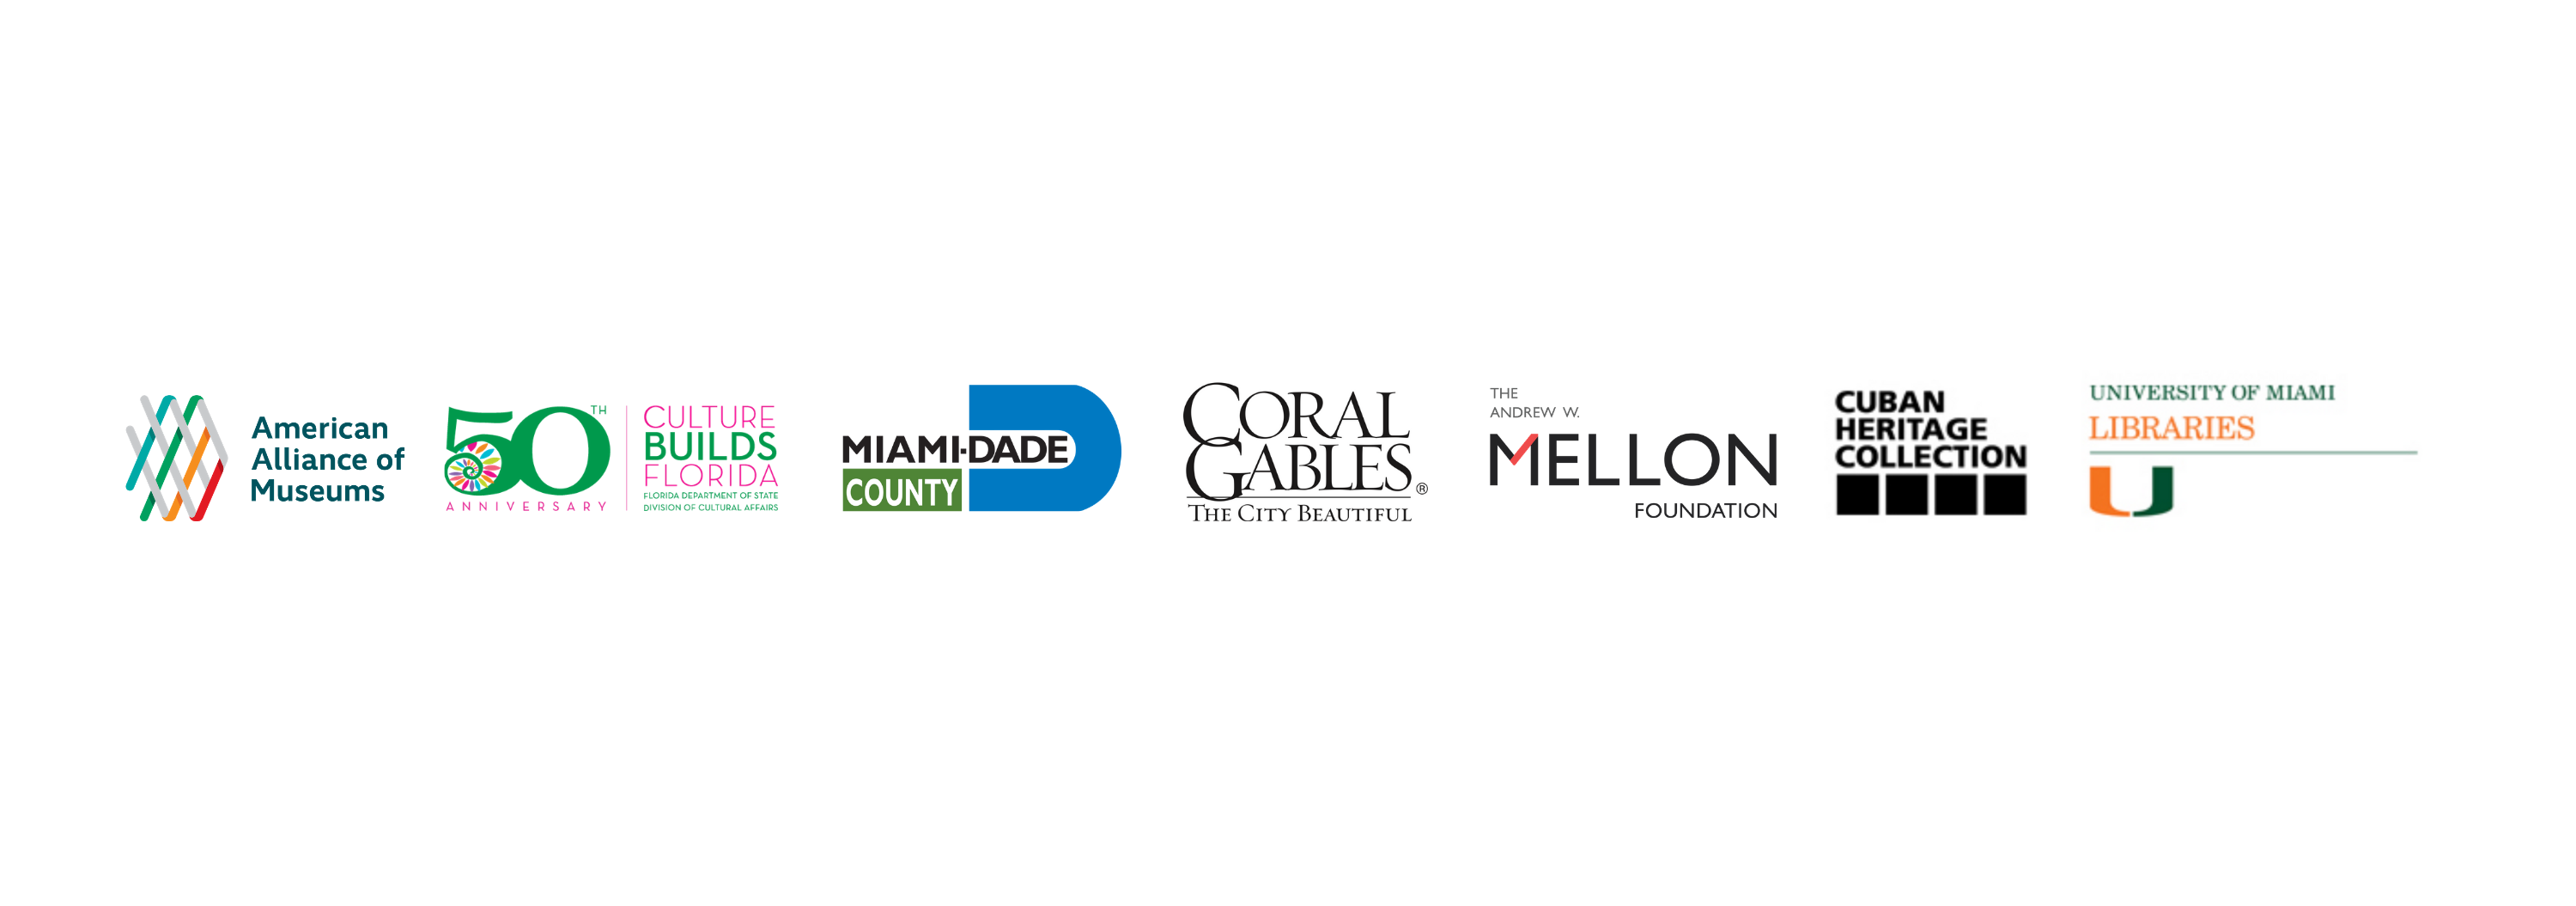 Logos for the American Alliance of Museums, Florida Department of State Division of Cultural Affairs, Miami-Dade County, City of Coral Gables, Andrew W. Mellon Foundation, Cuban Heritage Collection, University of Miami Libraries